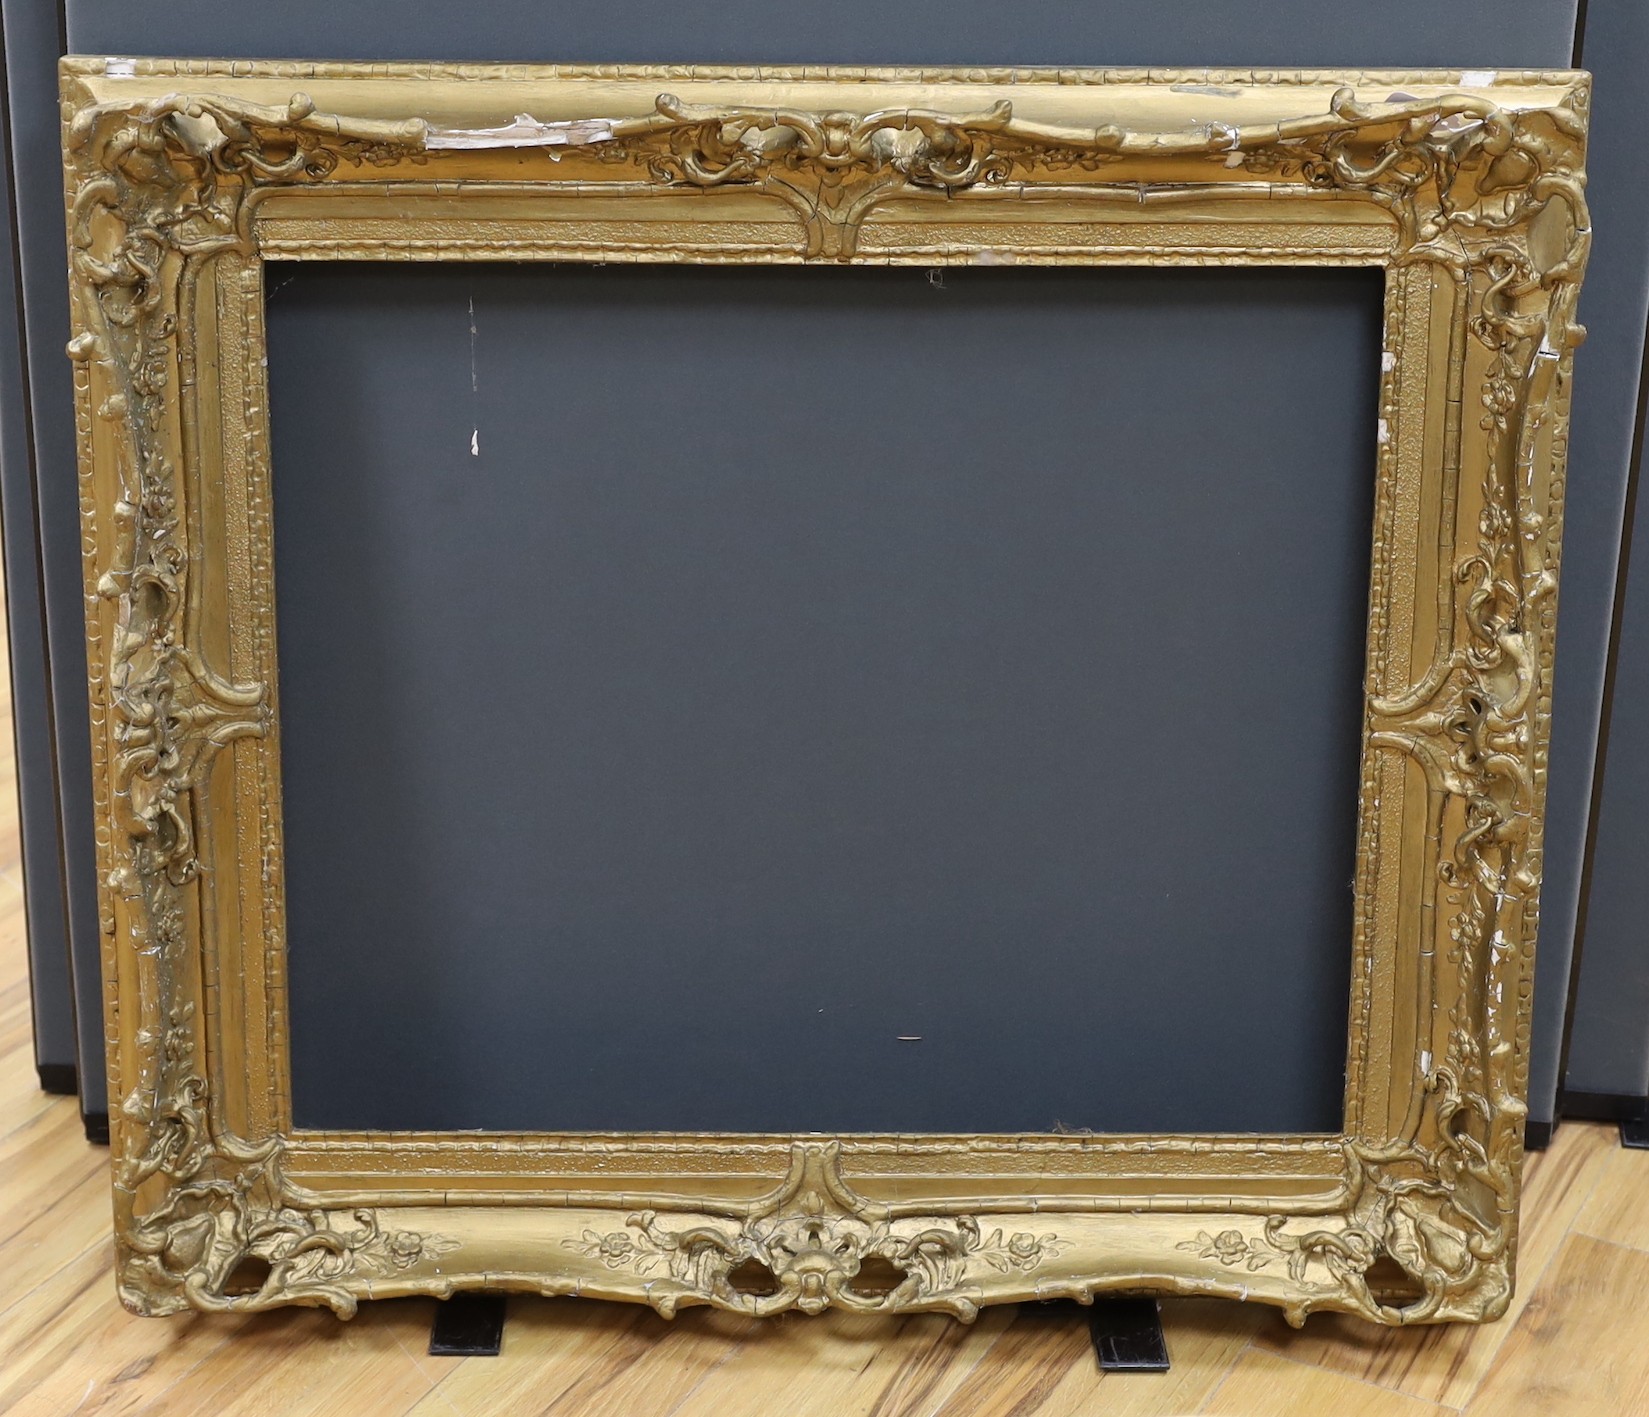 An ornate painted gilt picture frame, 90 x 100cm overall                                                                                                                                                                    